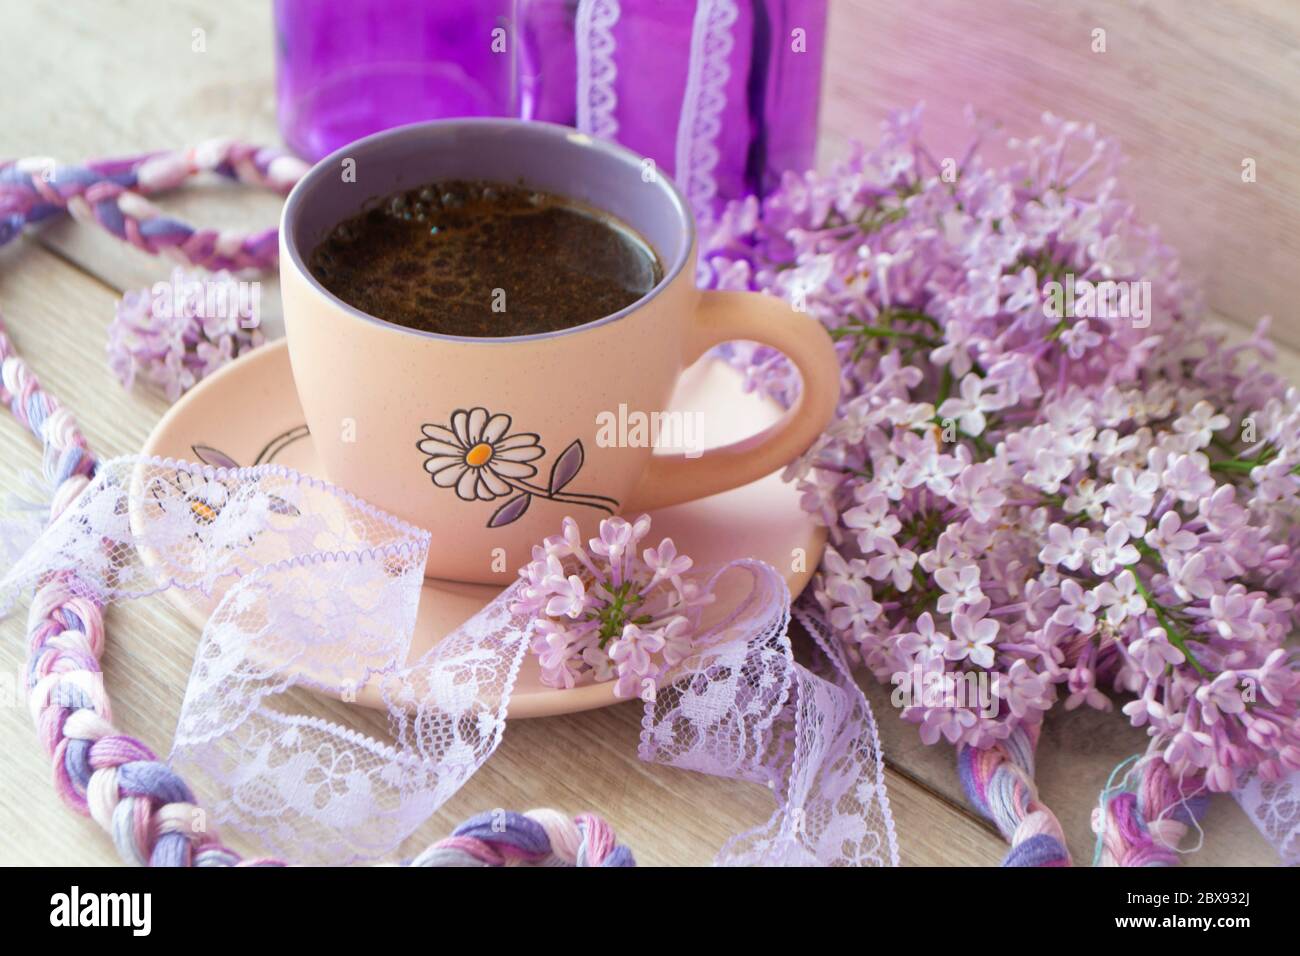 https://c8.alamy.com/comp/2BX932J/violet-cup-of-morning-coffee-or-cappuccino-and-delicate-purple-lilac-flowers-mothers-day-concept-cozy-breakfast-2BX932J.jpg